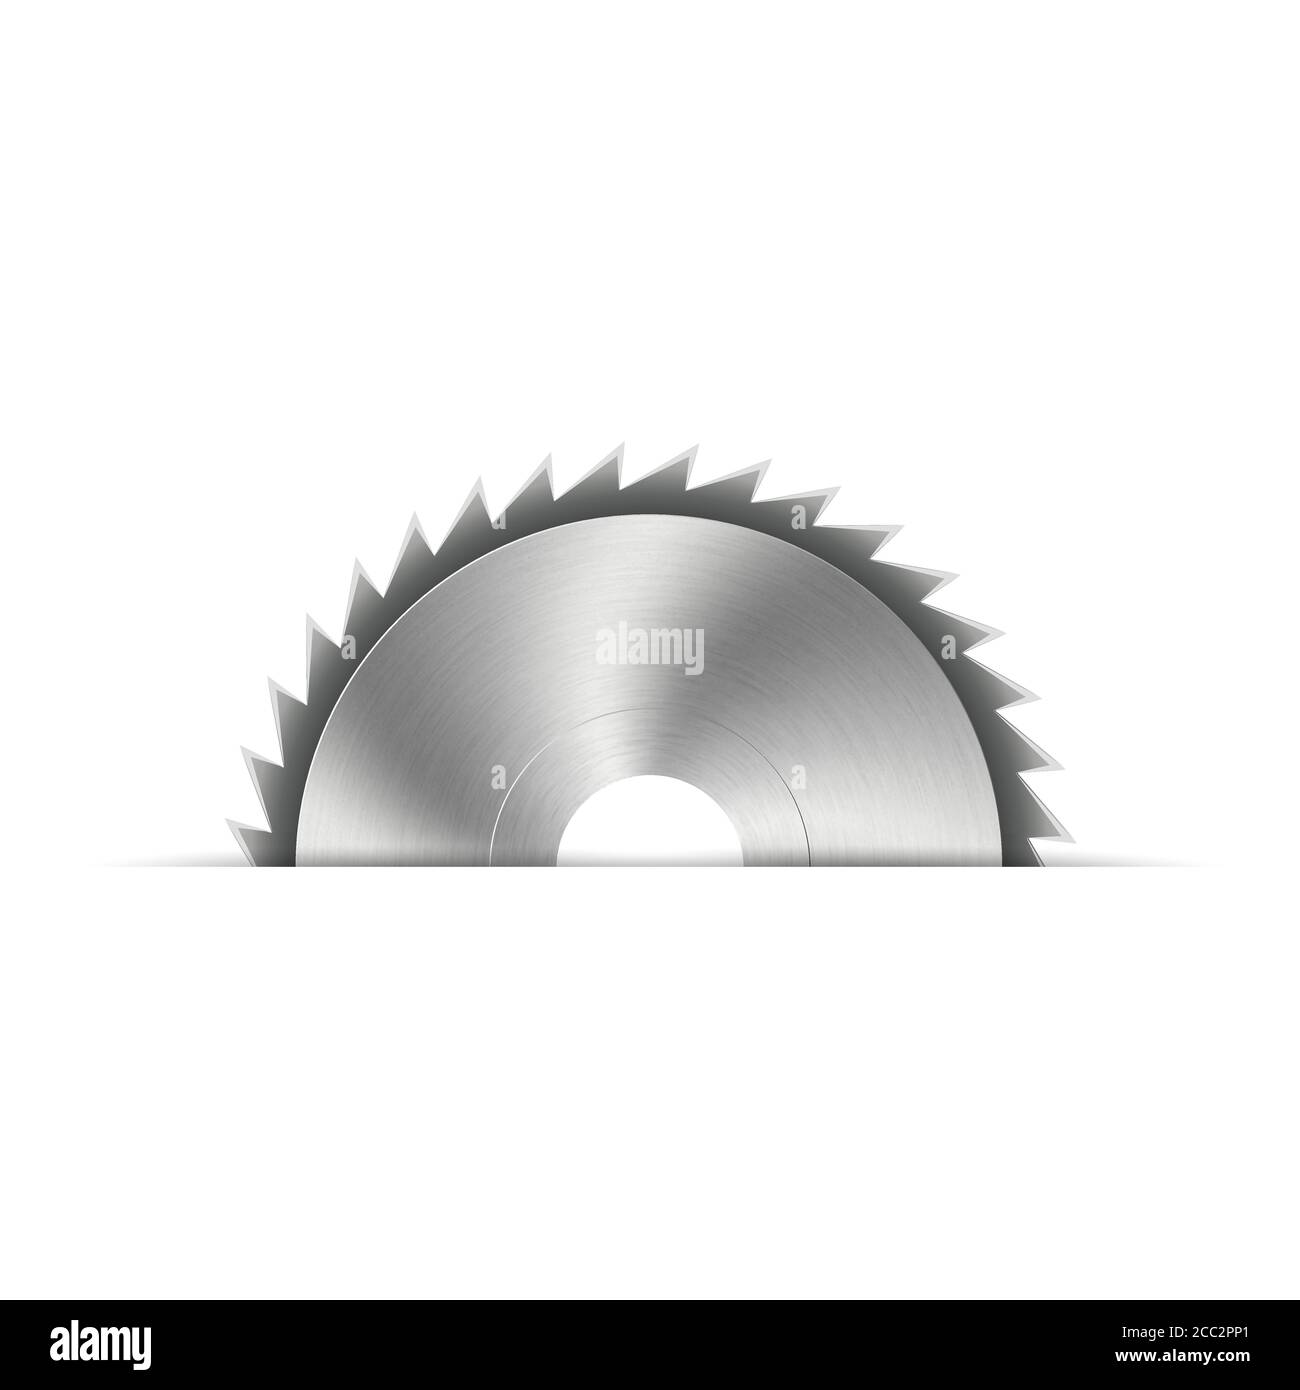 Realistic steel disc for circular saws, tools design elements. Isolated on white background, vector illustration. Stock Vector